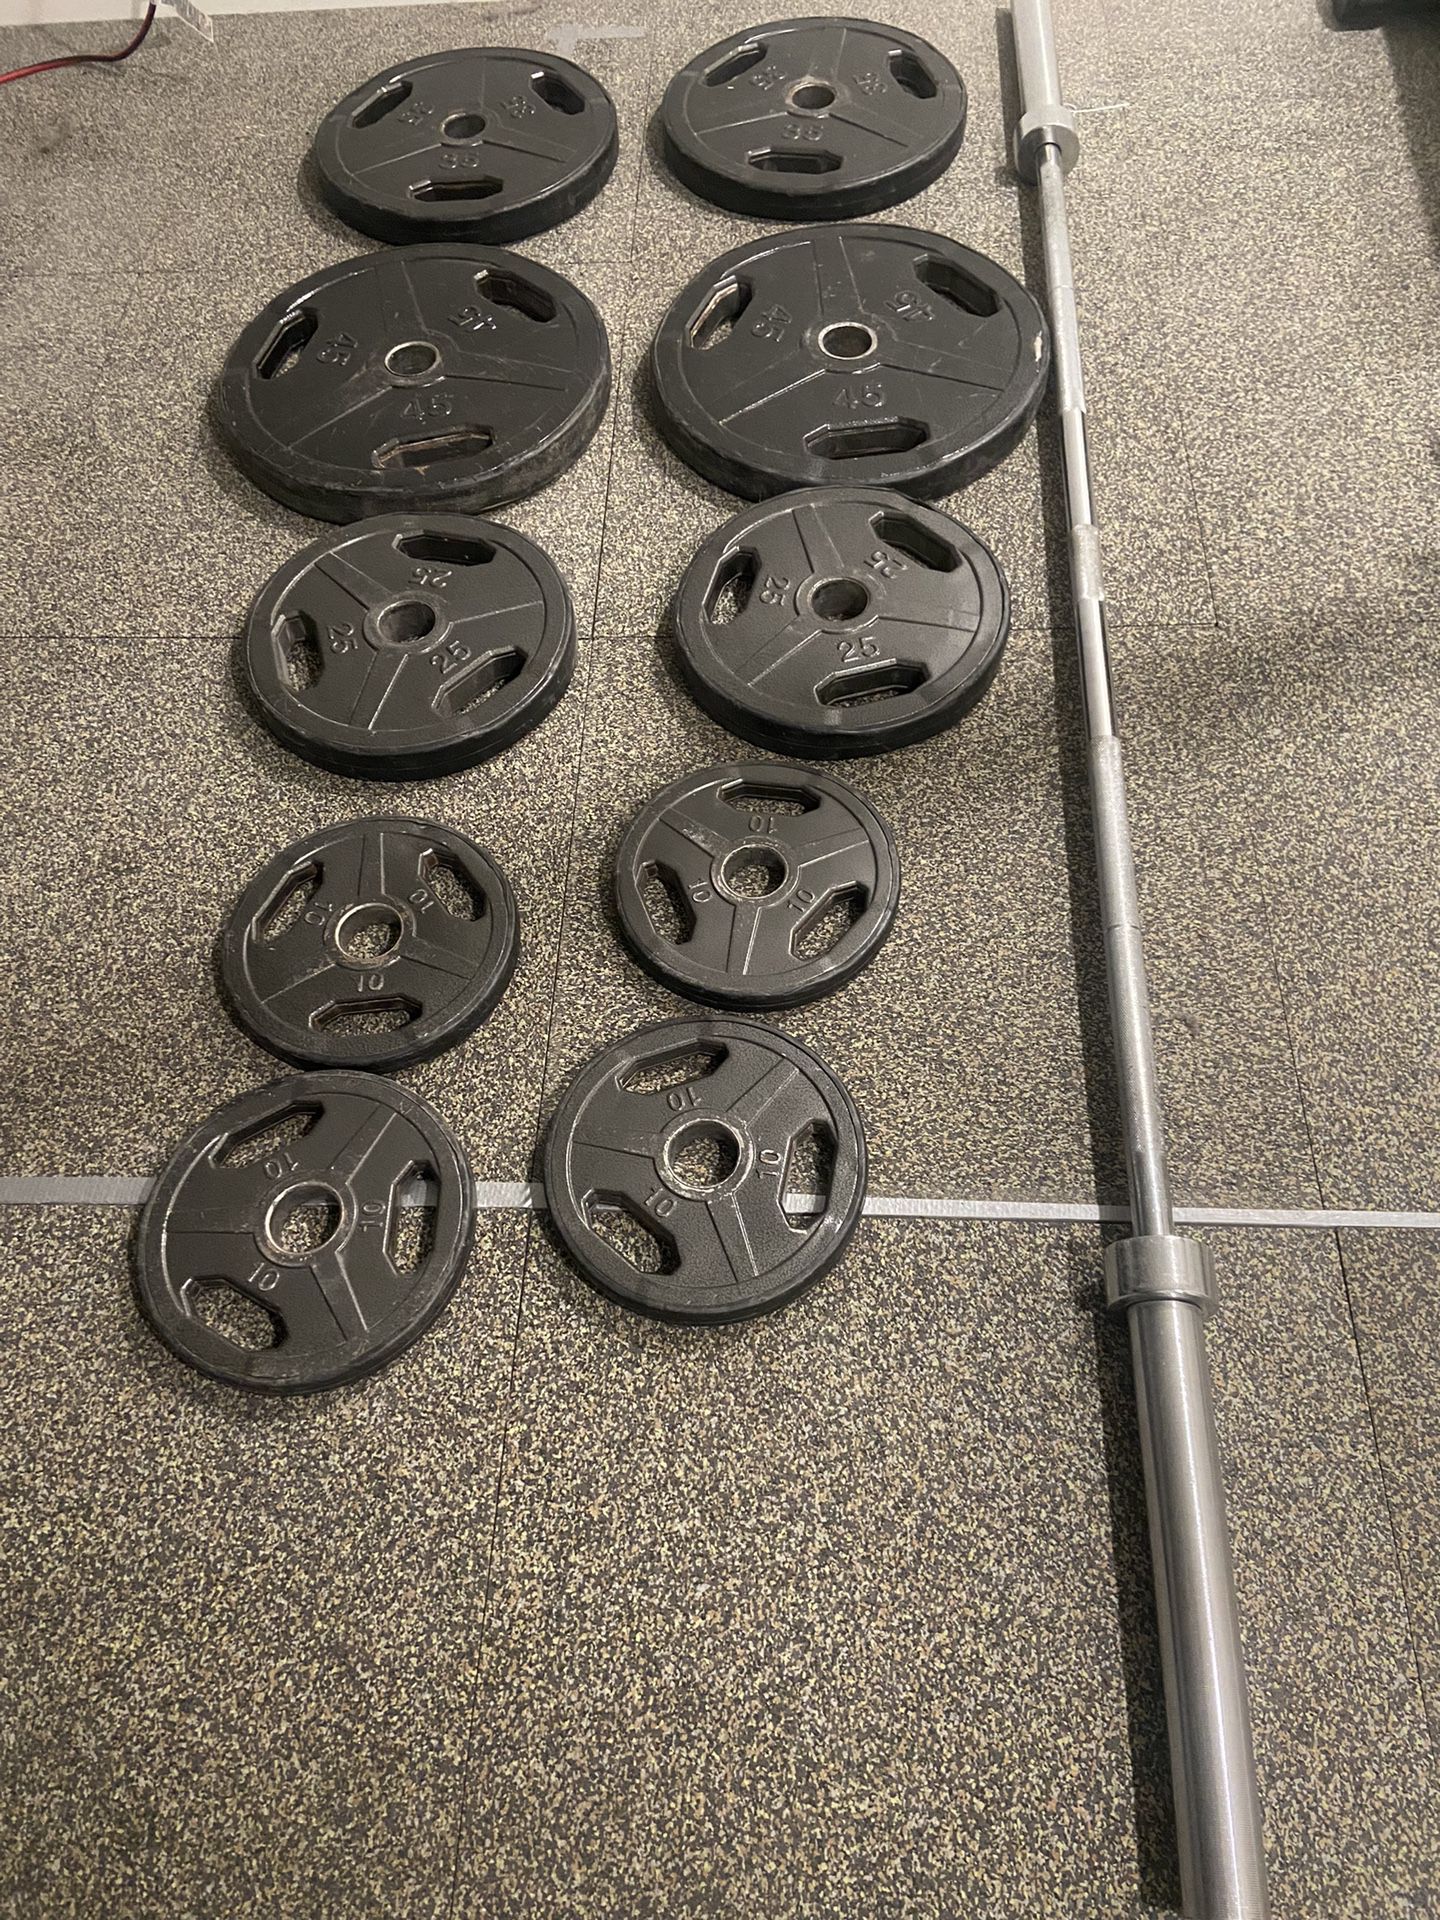 Weight Plates + Olympic barbell 